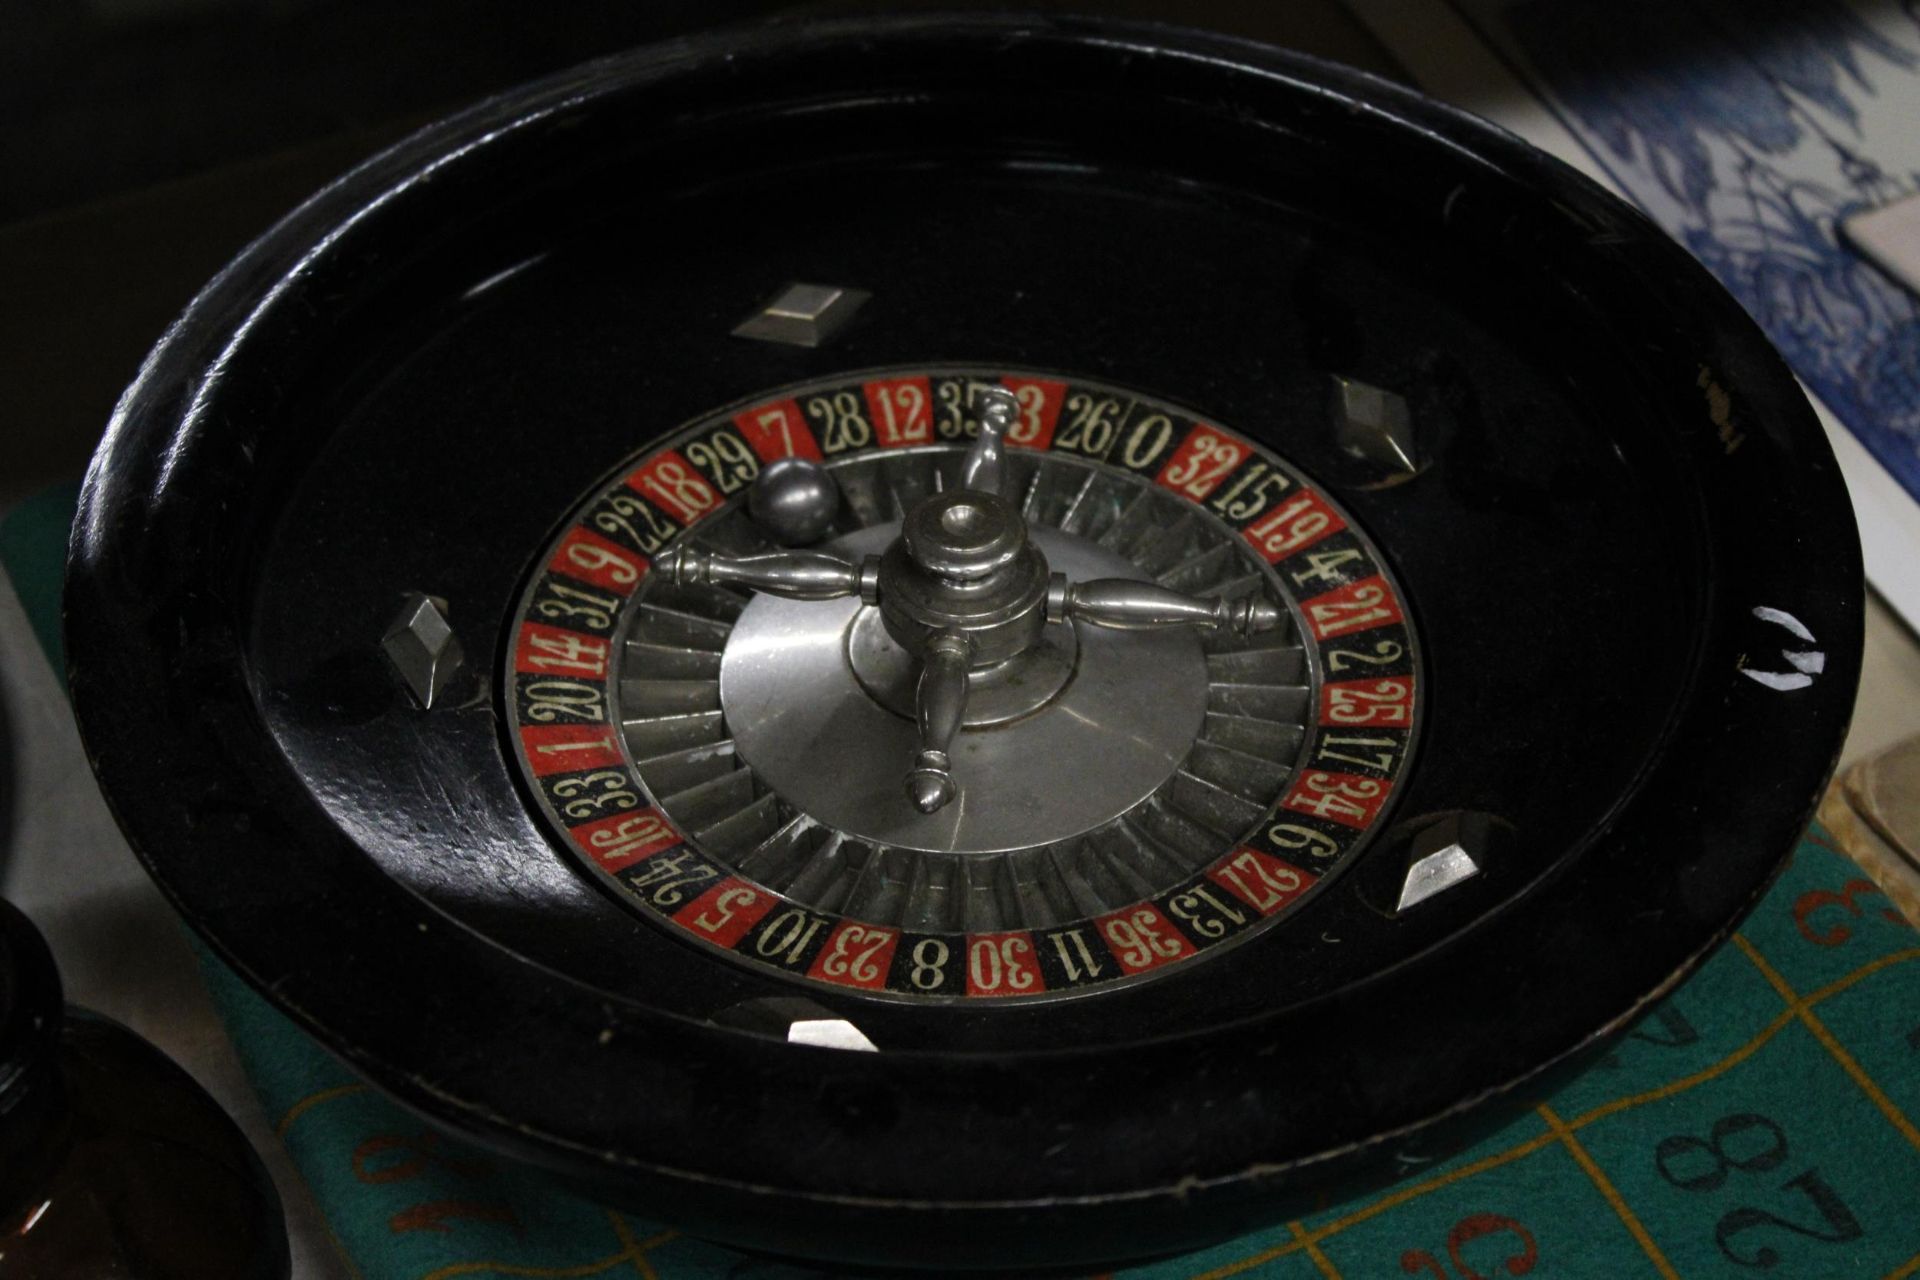 A VINTAGE ROULETTE WHEEL, FELT GAME BOARD AND COUNTERS - Image 3 of 4